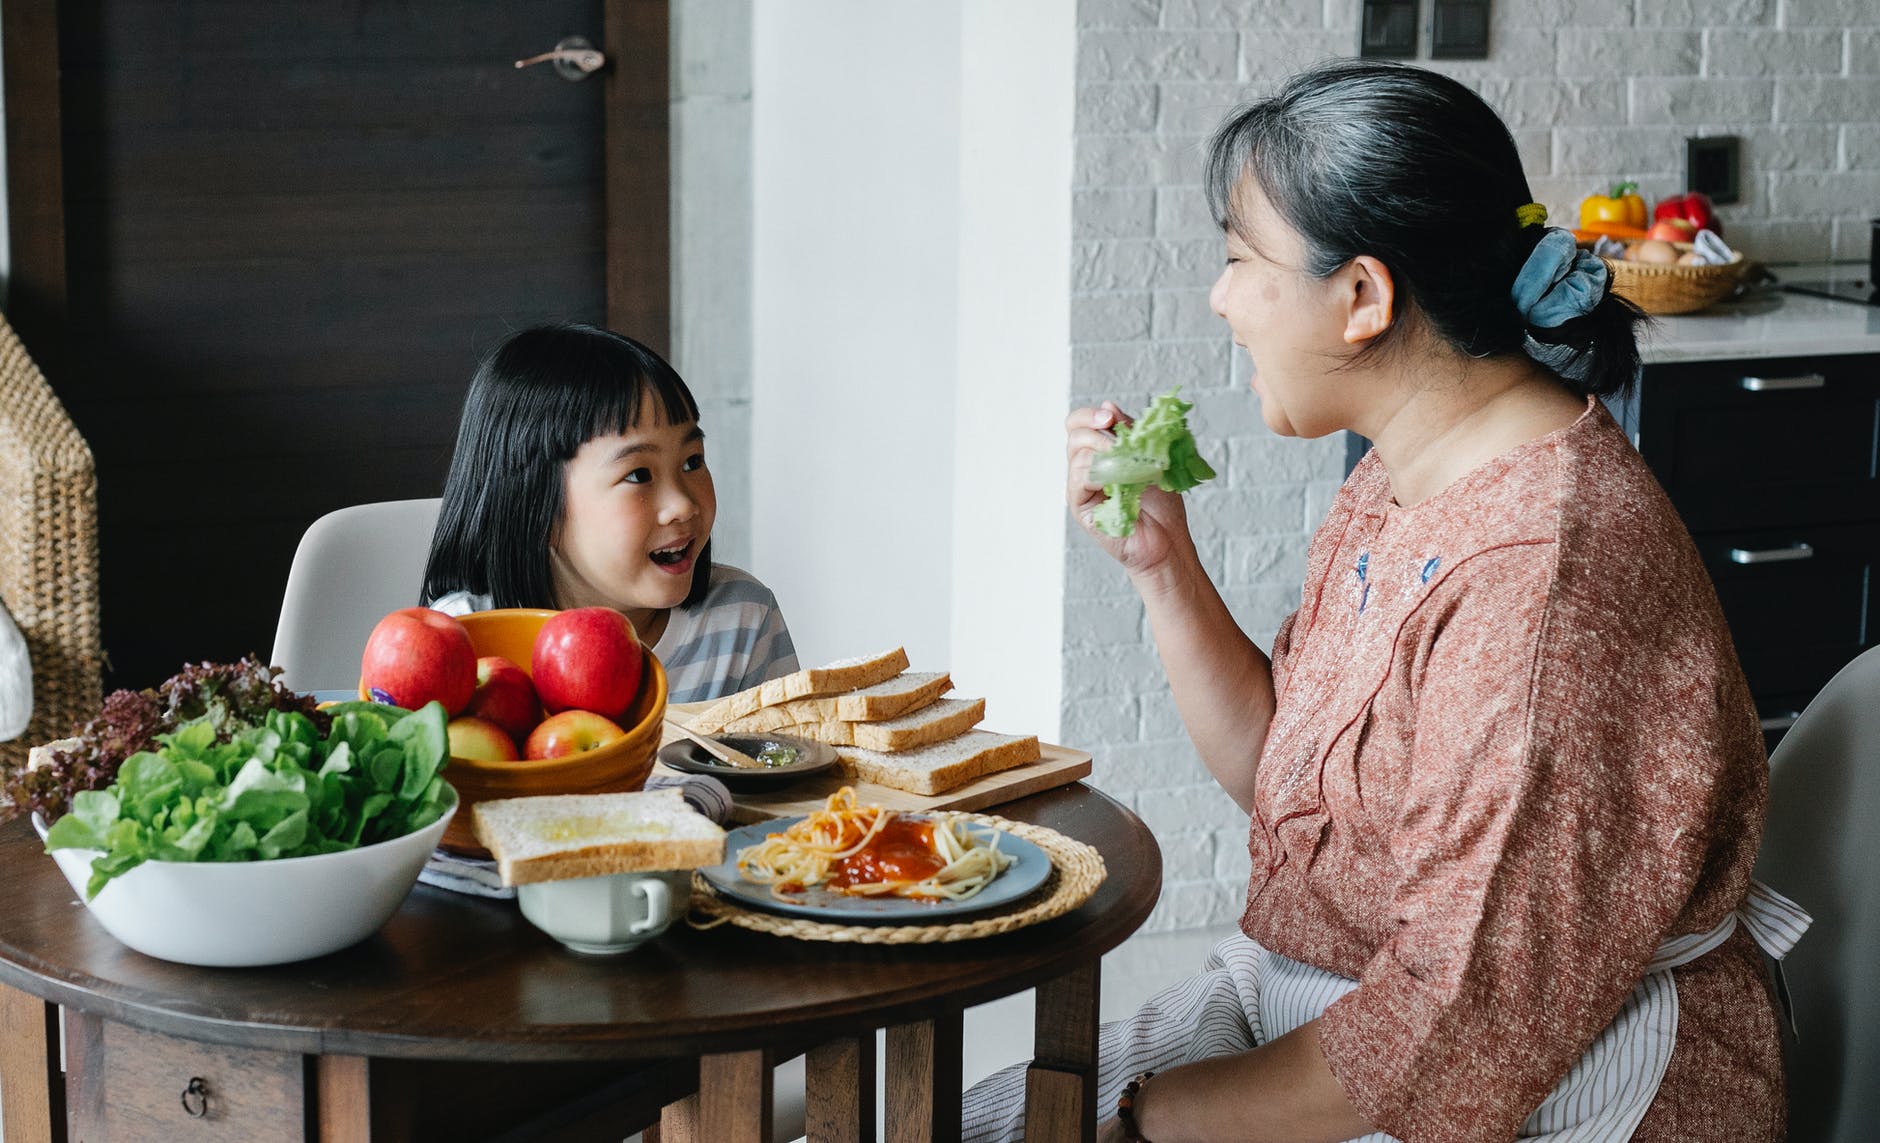 delighted ethnic little girl looking at grandmother eating healthy salad